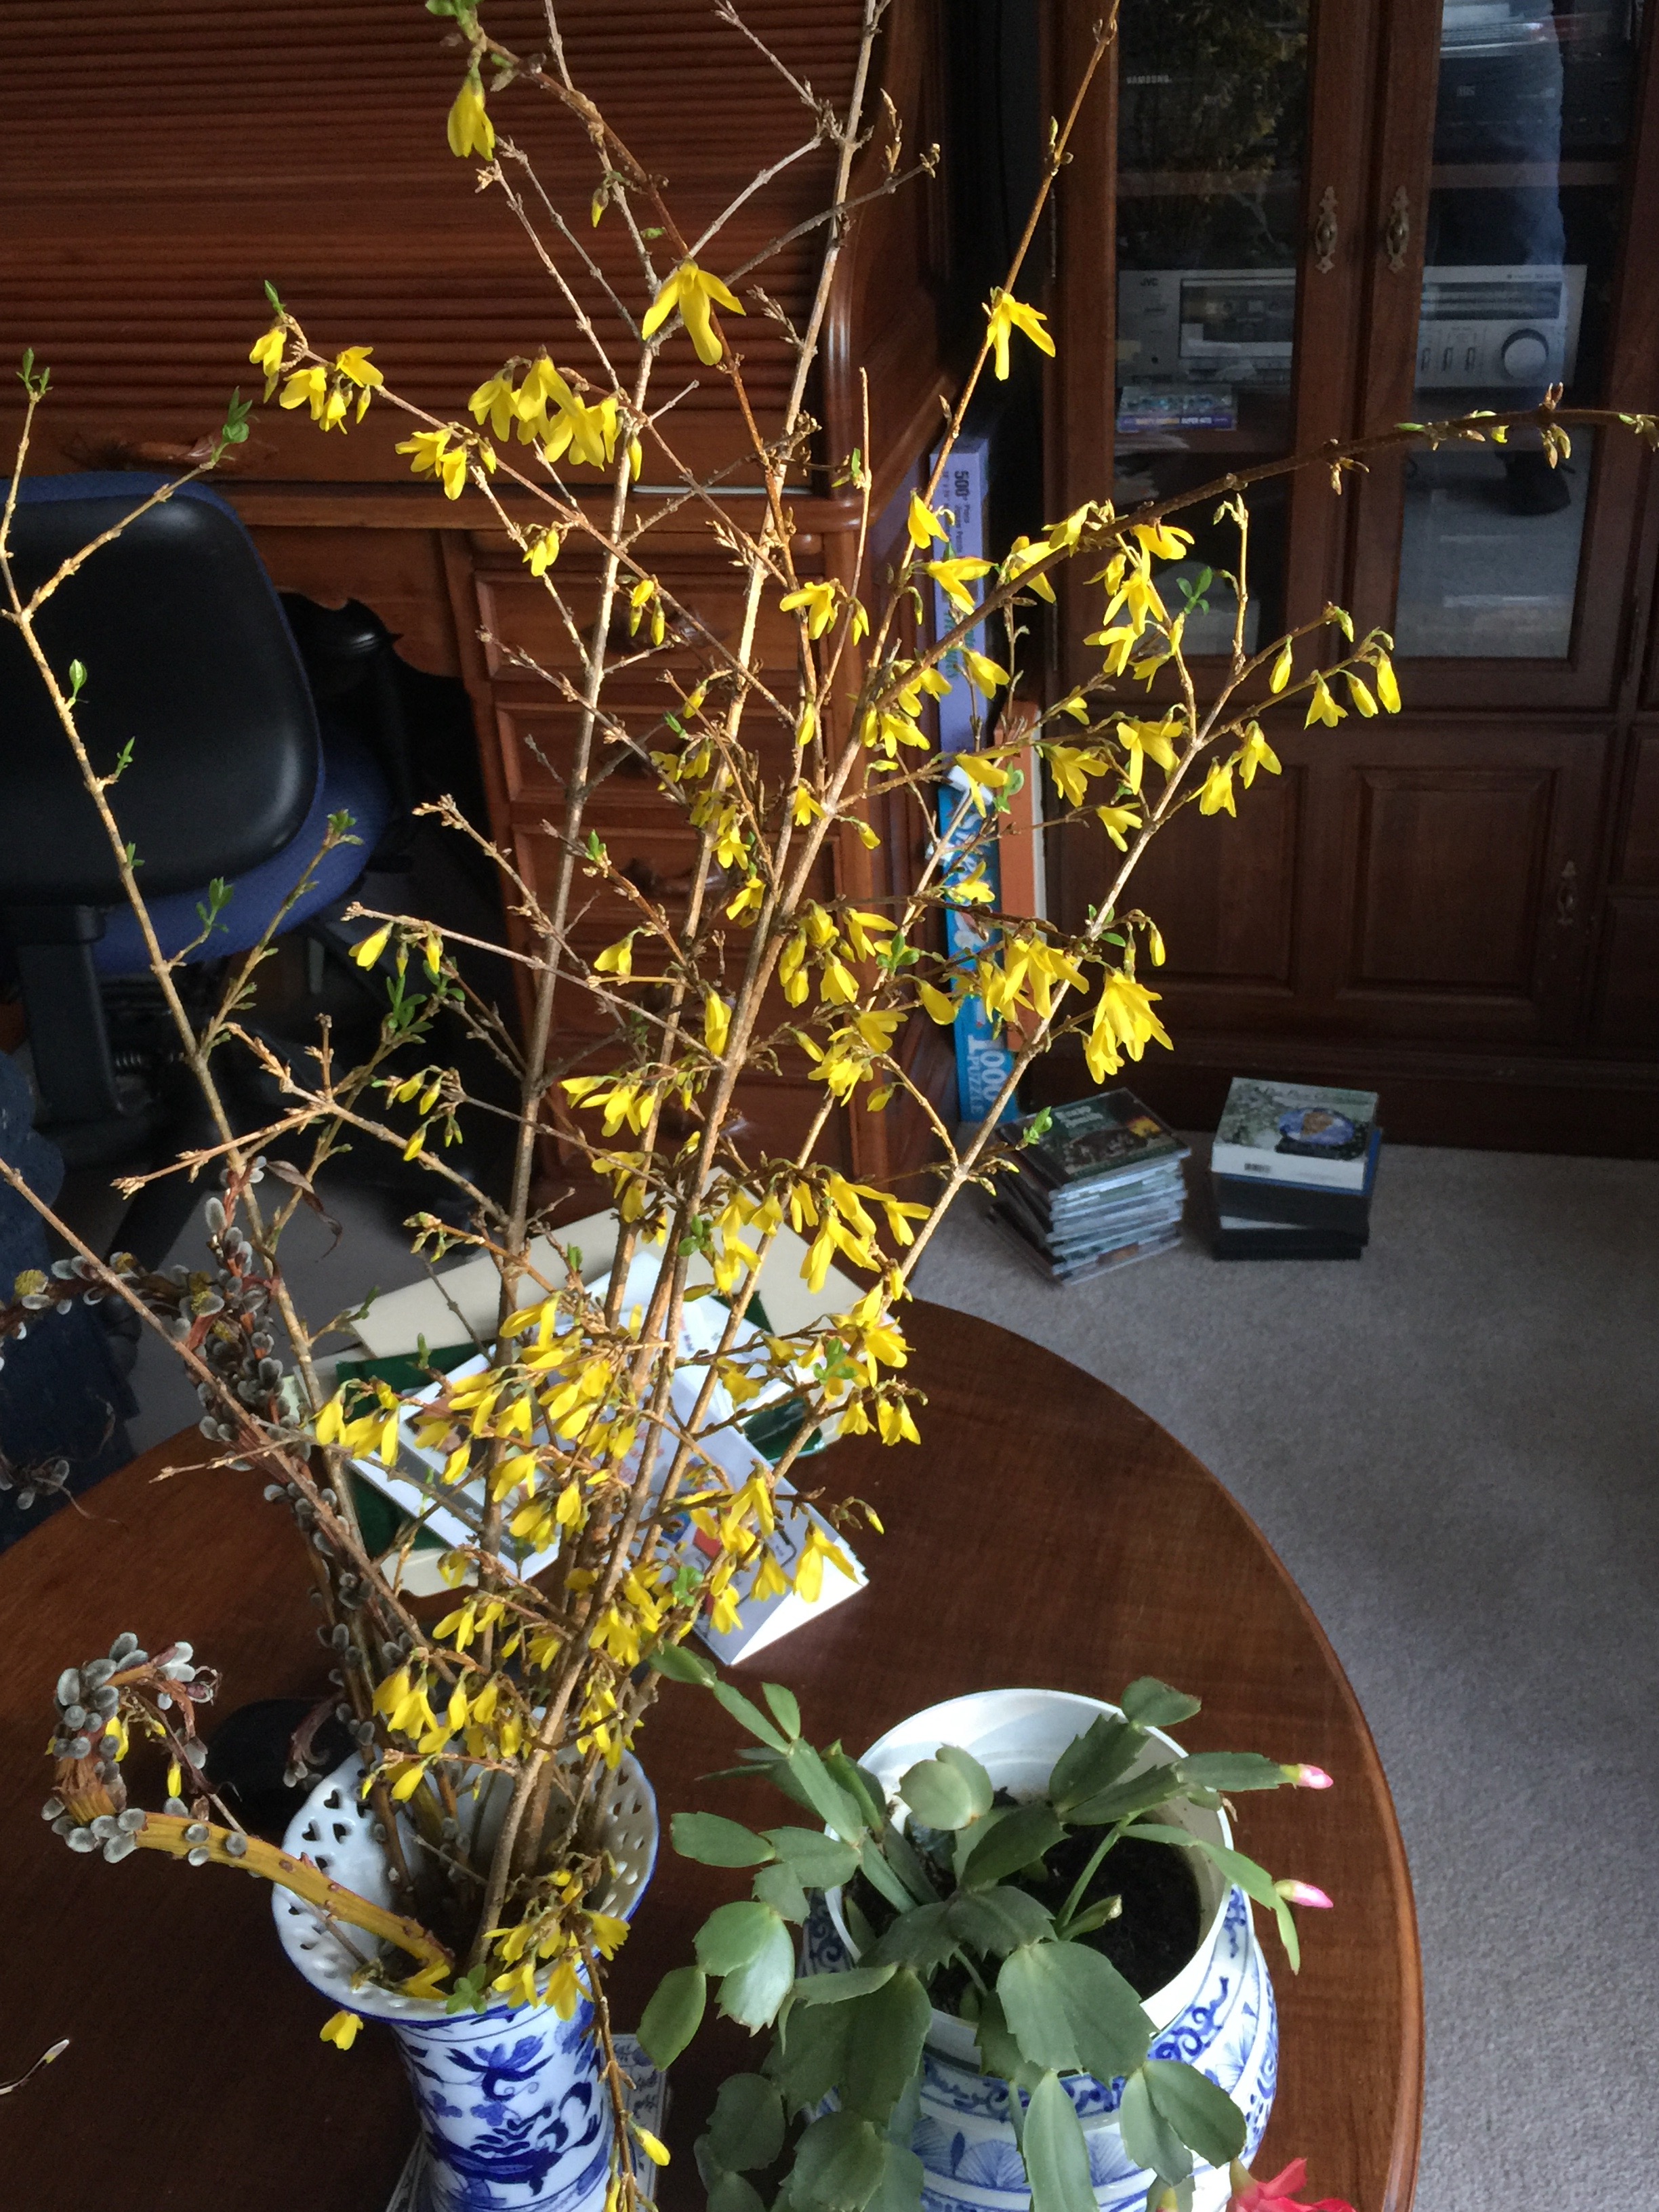 A vase on a table with Forsythia, showing newly opened bright yellow blossoms.